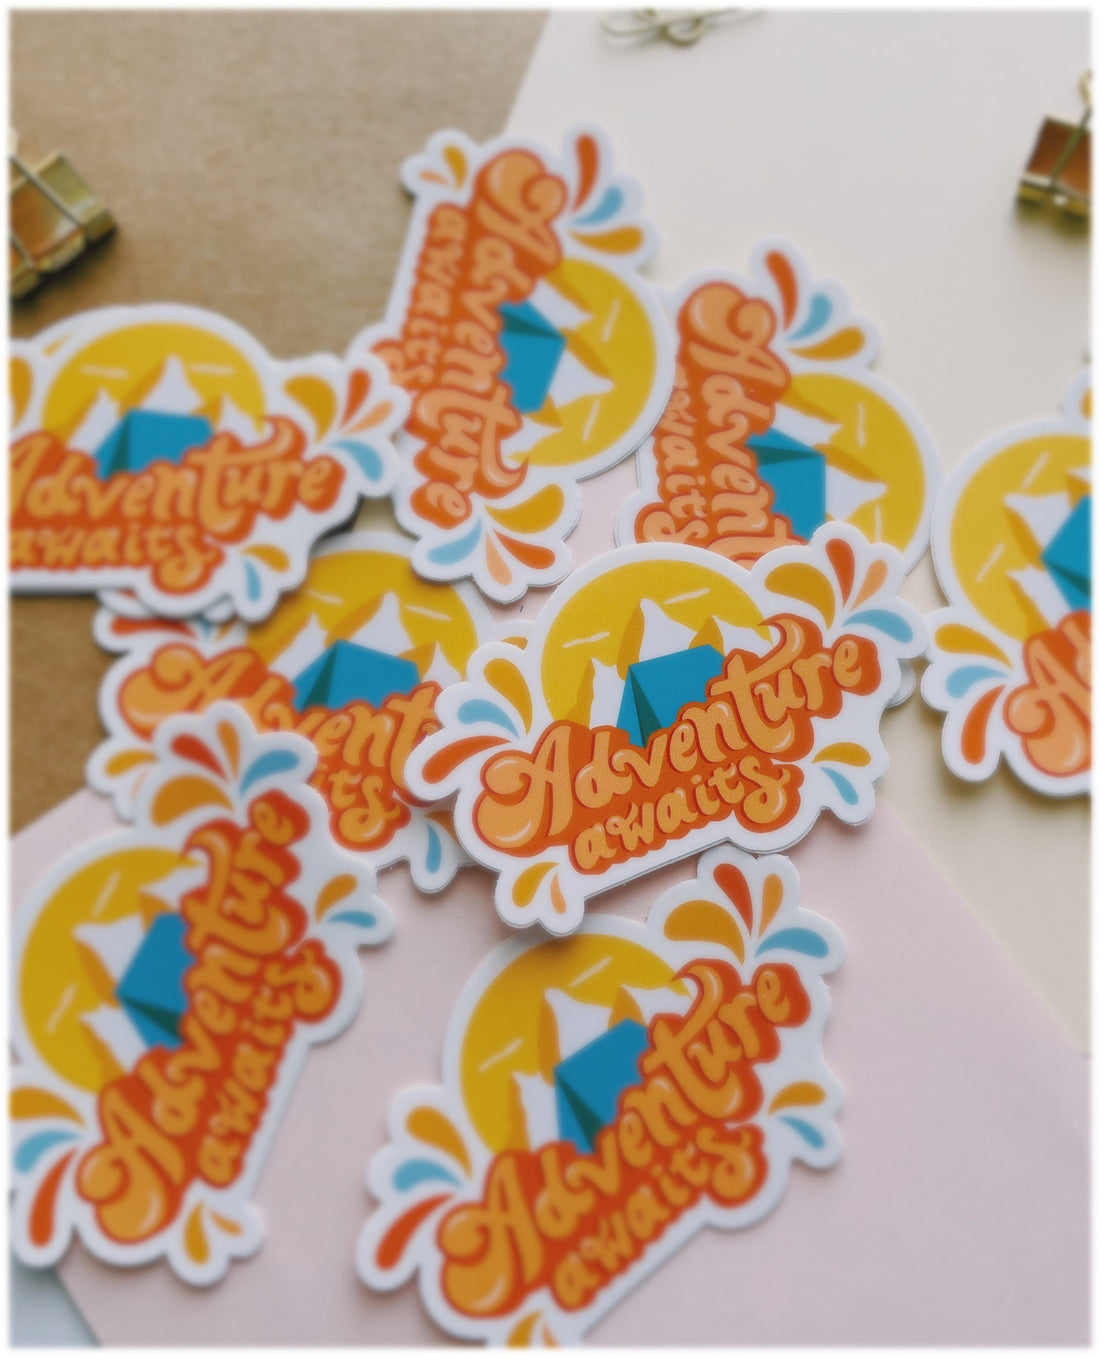 Orange and blue camping sticker that says Adventure Awaits. Includes a mountain range and camping tent